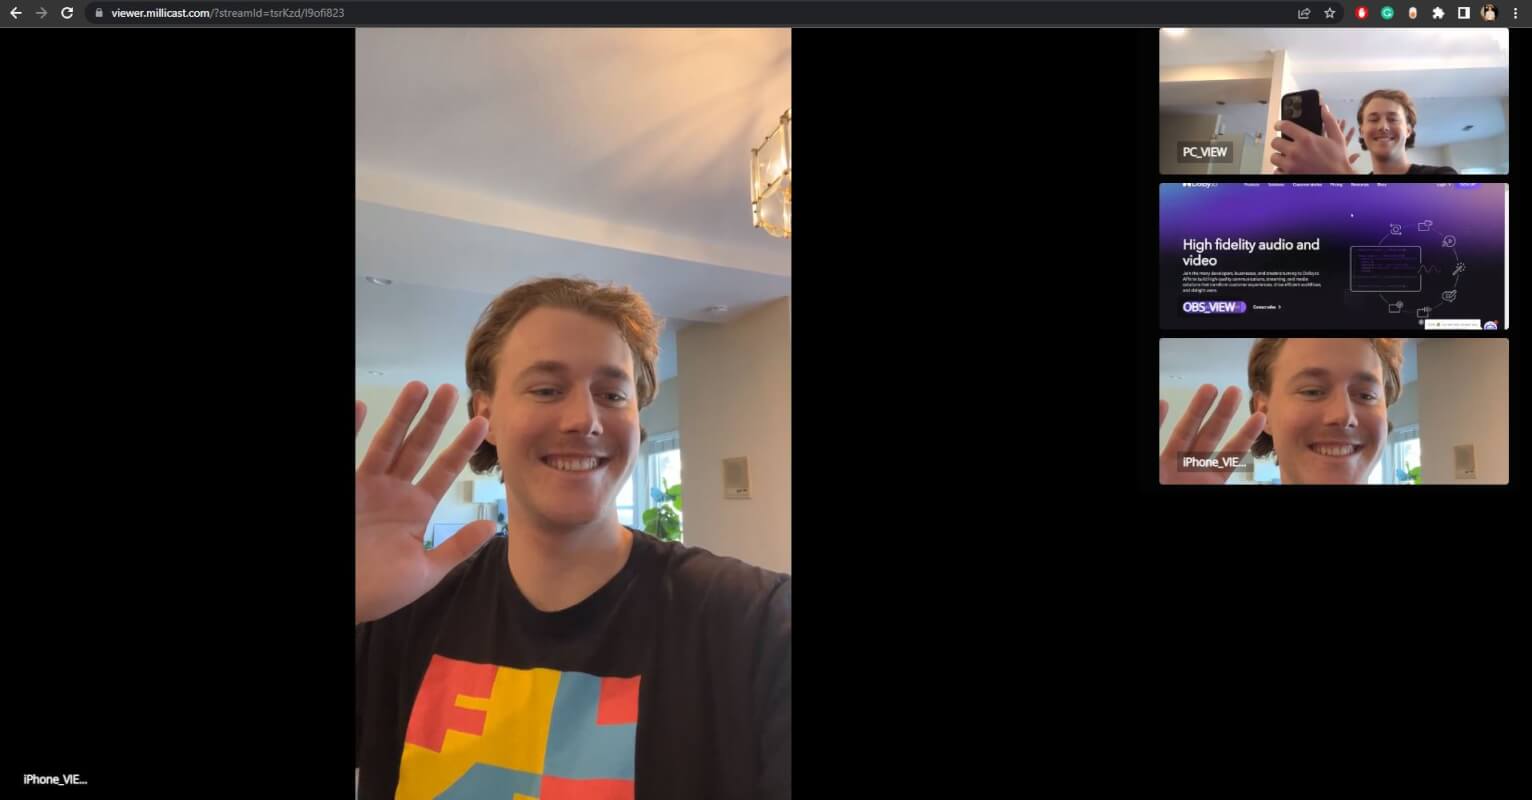 An example of the WebRTC multiview feature streaming three feeds. Users can switch between an iPhone view (Seen enlarged above), a PC webcam view, and a view of the PC desktop streamed from OBS.